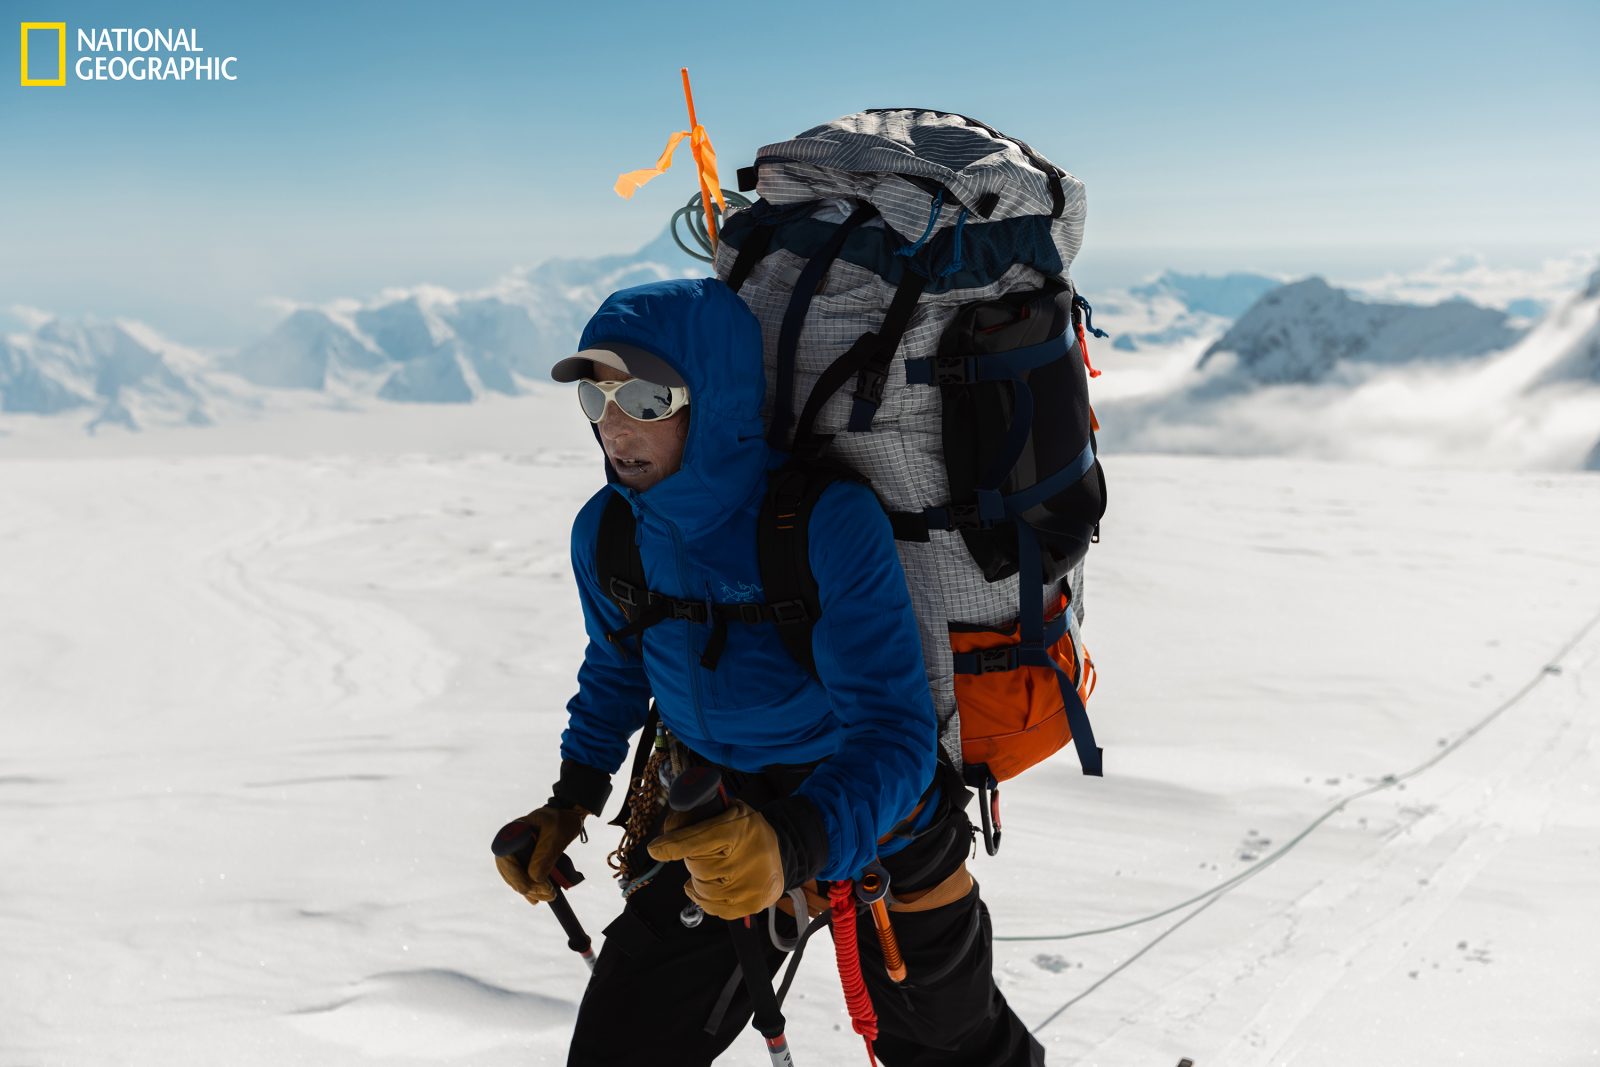 Alison Criscitiello wears a blue mountaineering jacket and gear-filled hiking backpack while traversing snow-covered flatland at high altitudes on Mount Logan in the Canadian Yukon. She is wearing large sunglasses and using hiking poles while attached to a guide wire. The backdrop is a clear blue sky and massive mountain peaks.